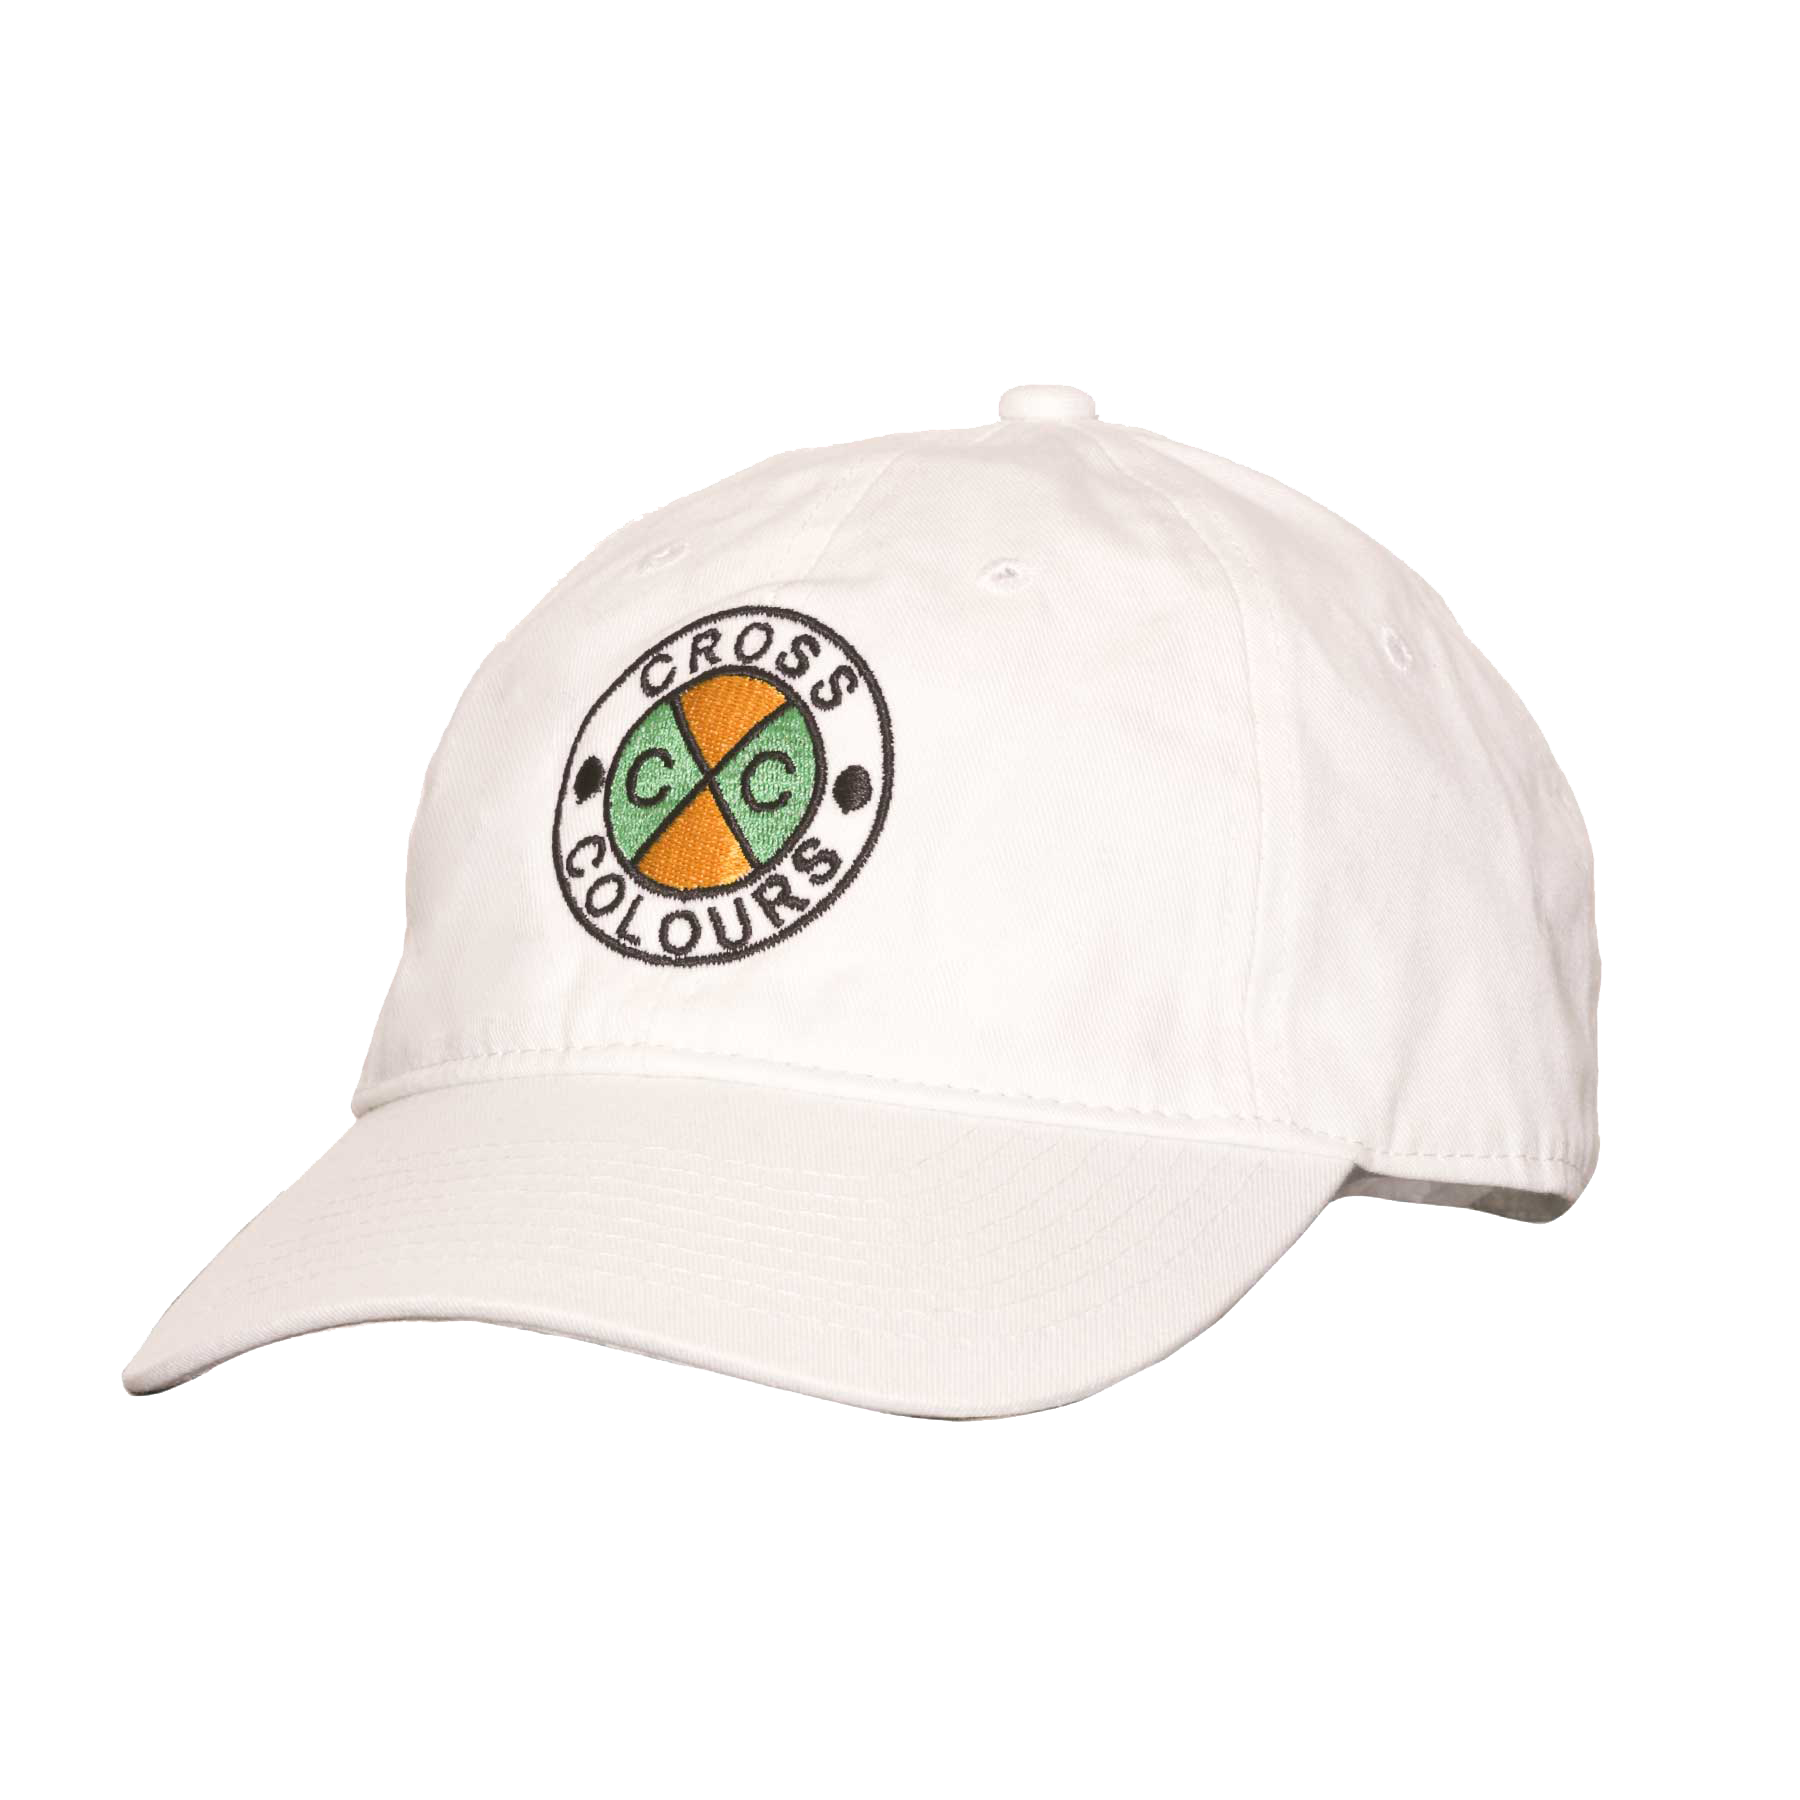 Cross Colours Classic Embroidered Dad Hat - White